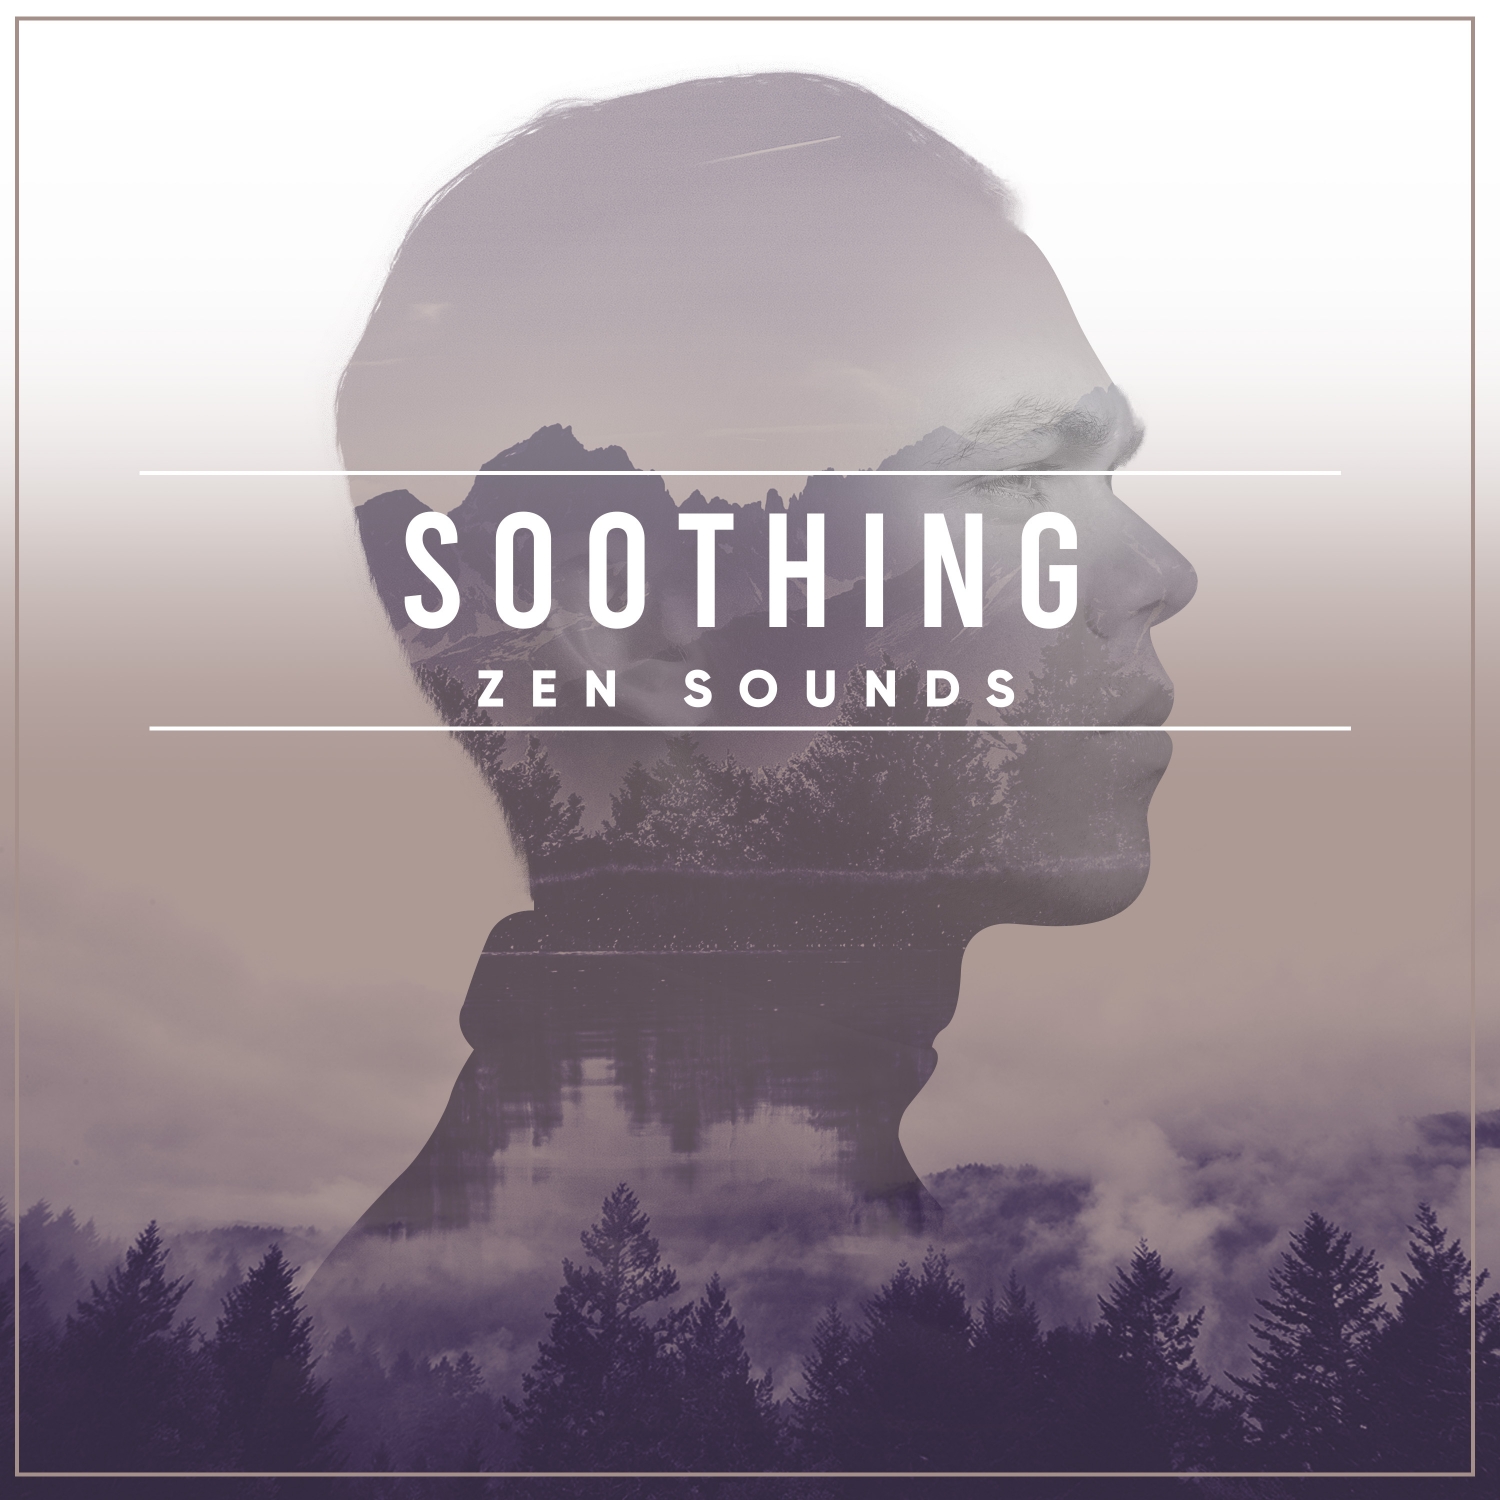 17 Soothing Zen Sounds to Provide Focus